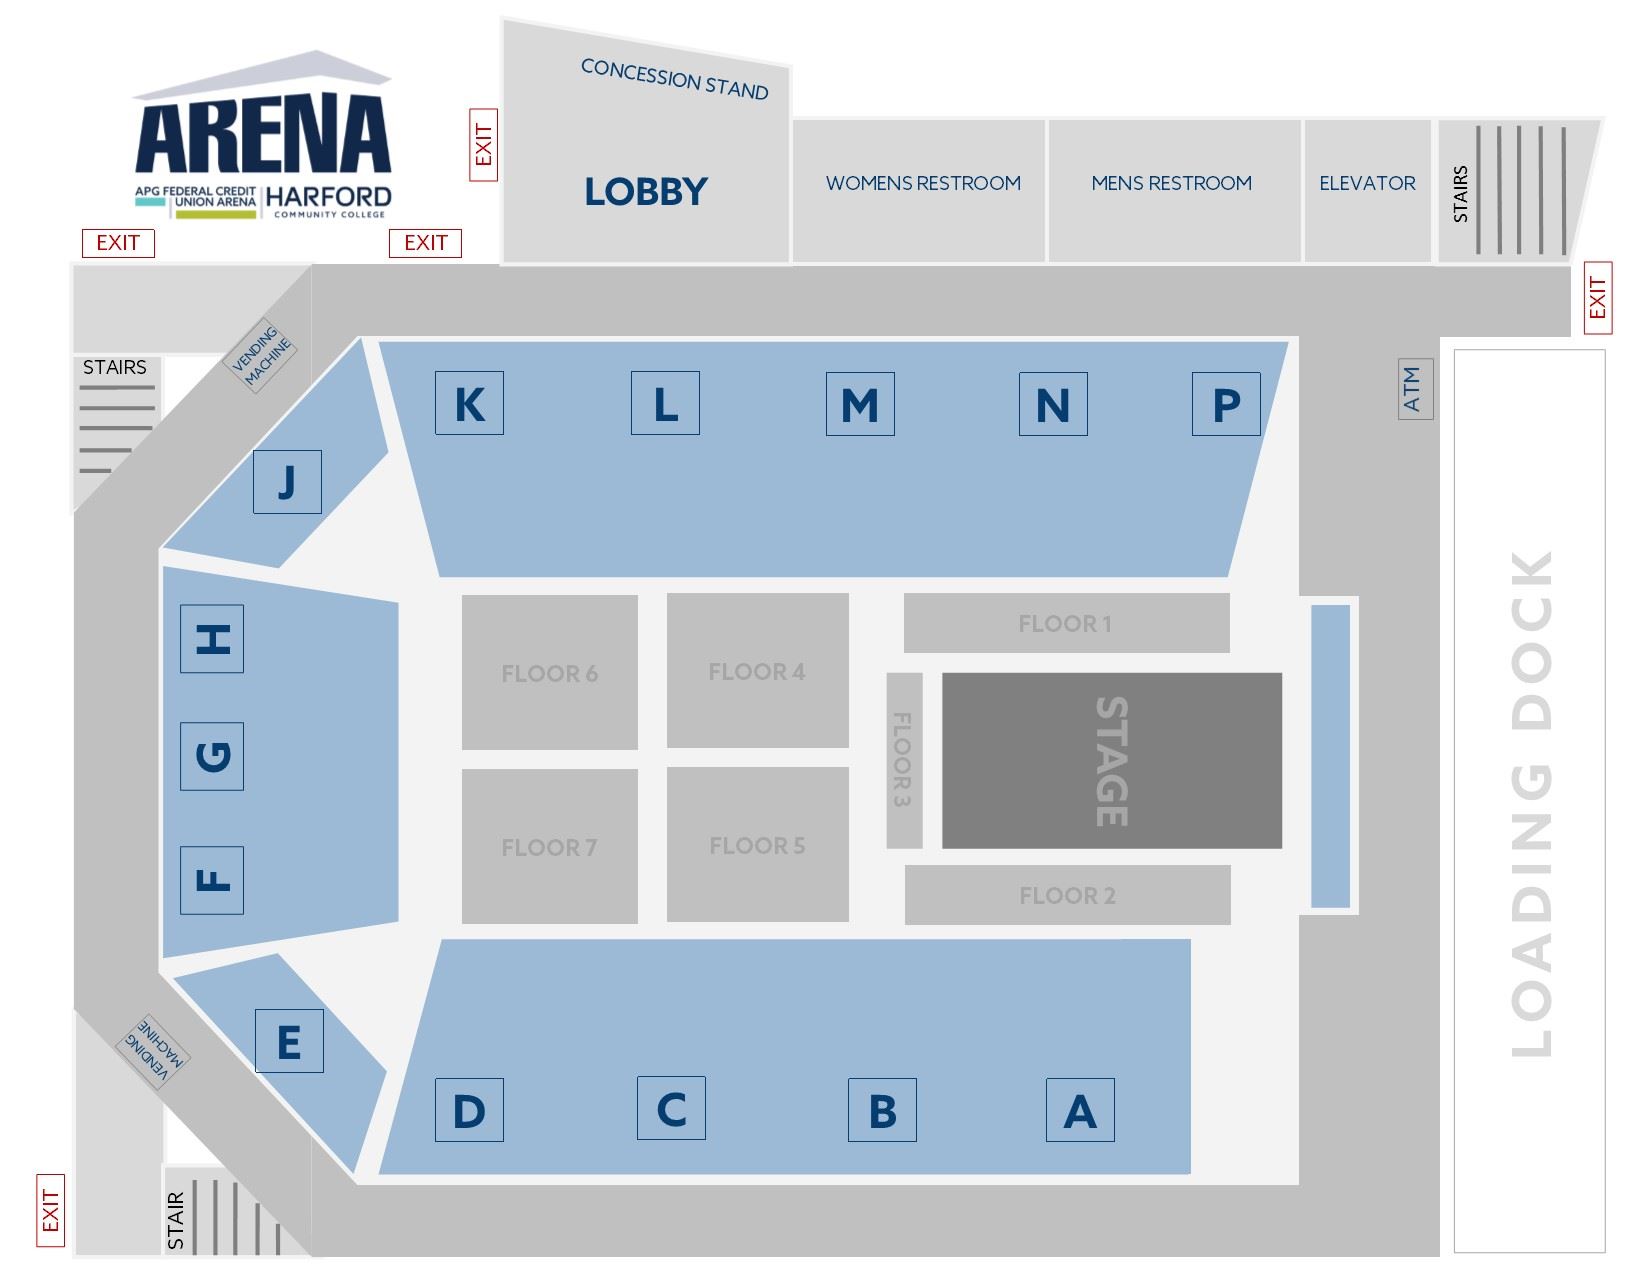 Seating Configurations APG Federal Credit Union Arena